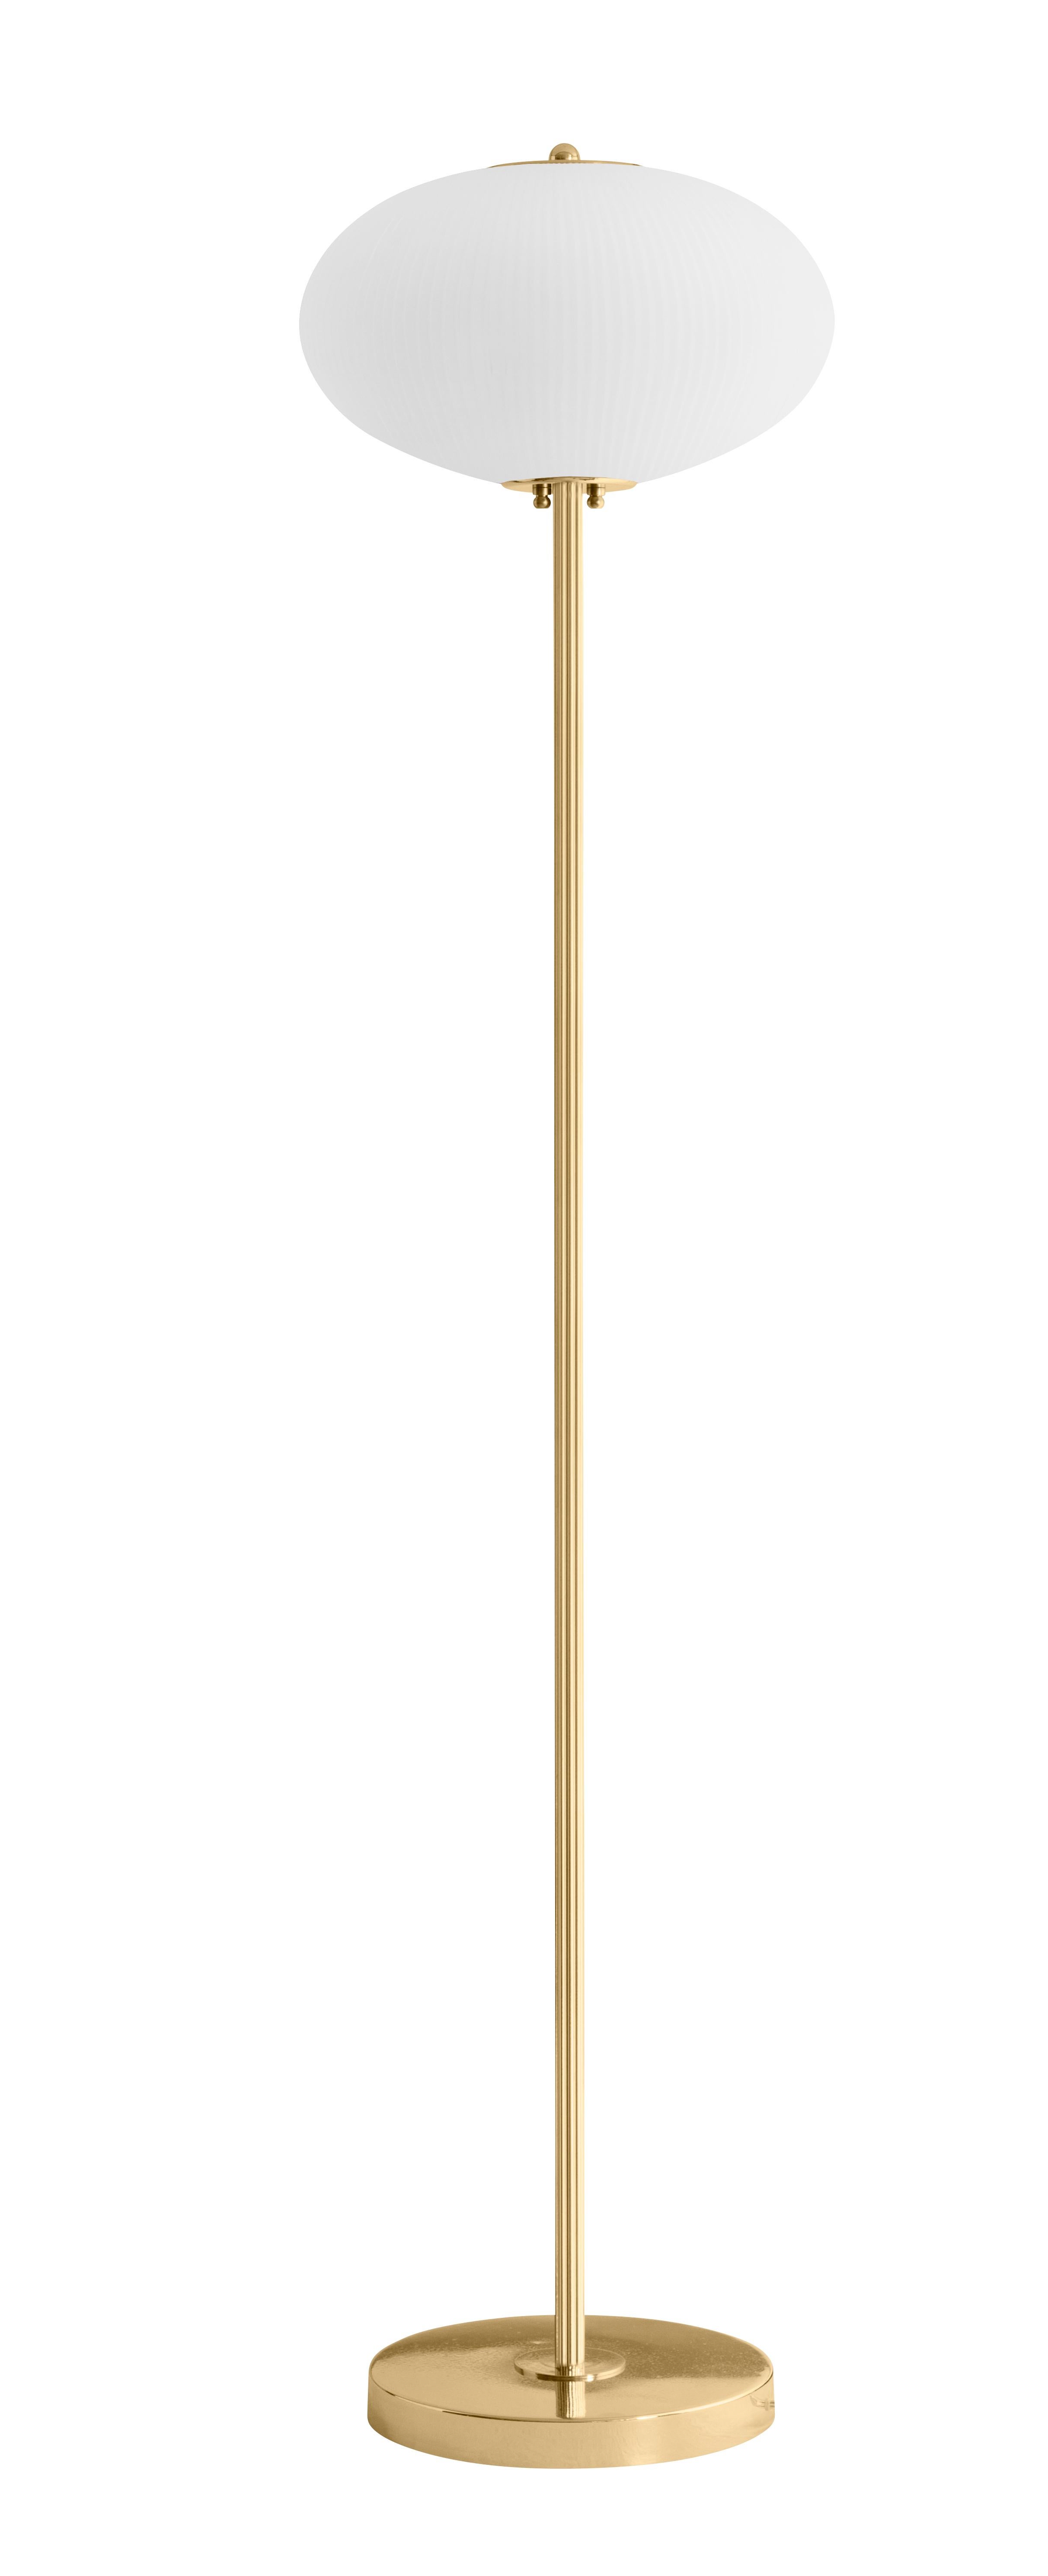 Floor lamp China 07 by Magic Circus Editions
Dimensions: H 150 x W 32 x D 32 cm, also available in H 140, 160
Materials: Brass, mouth blown glass sculpted with a diamond saw
Colour: enamel soft white

Available finishes: Brass, nickel
Available